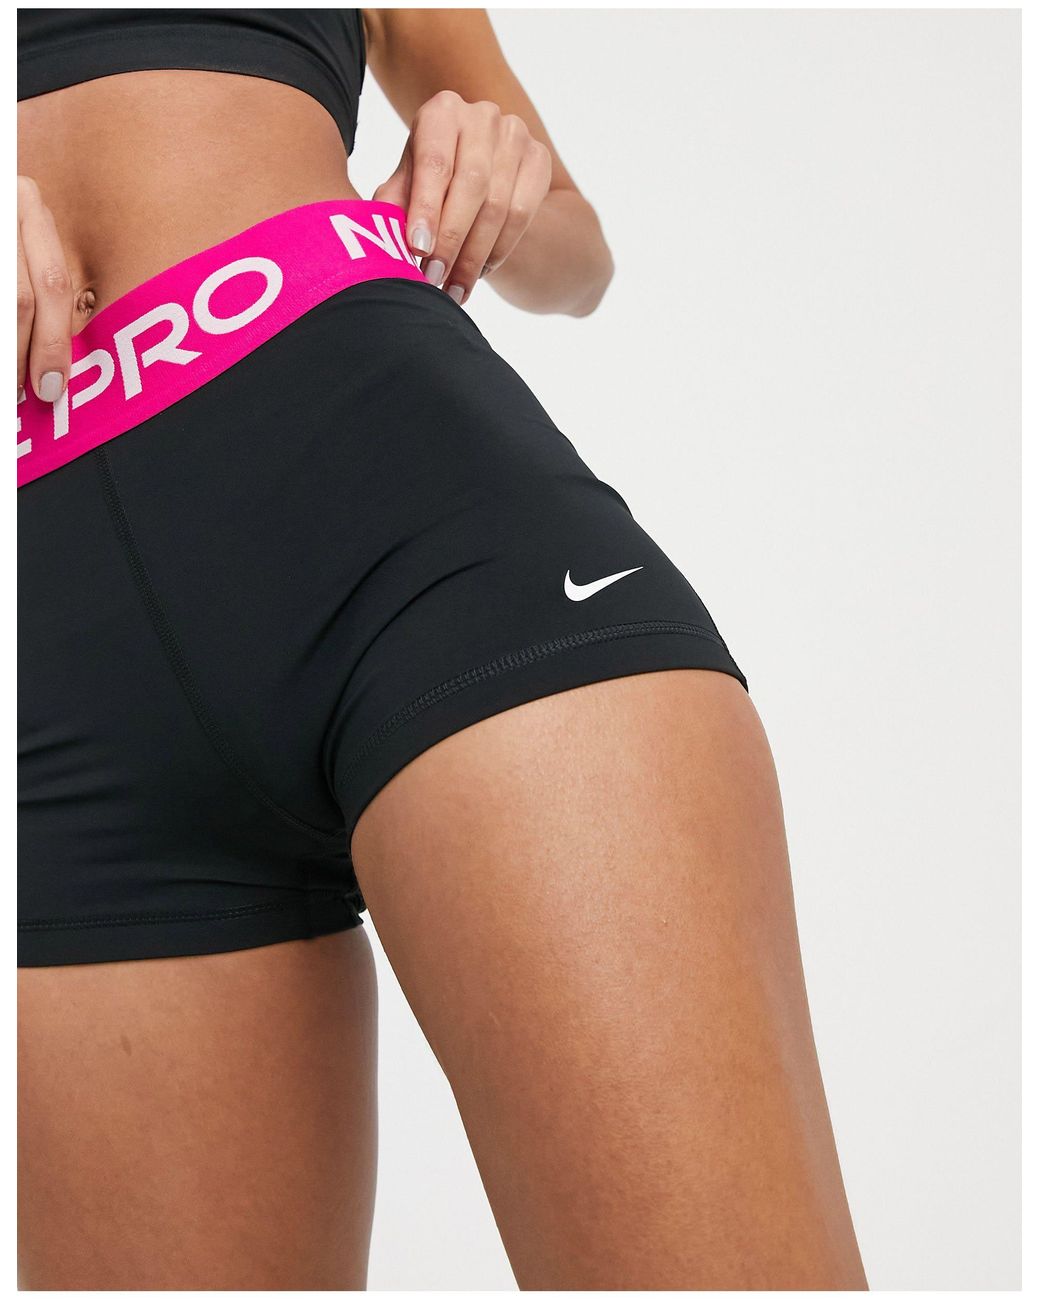 Nike Pro 365 3inch Shorts With Pink Waistband in Black | Lyst Canada